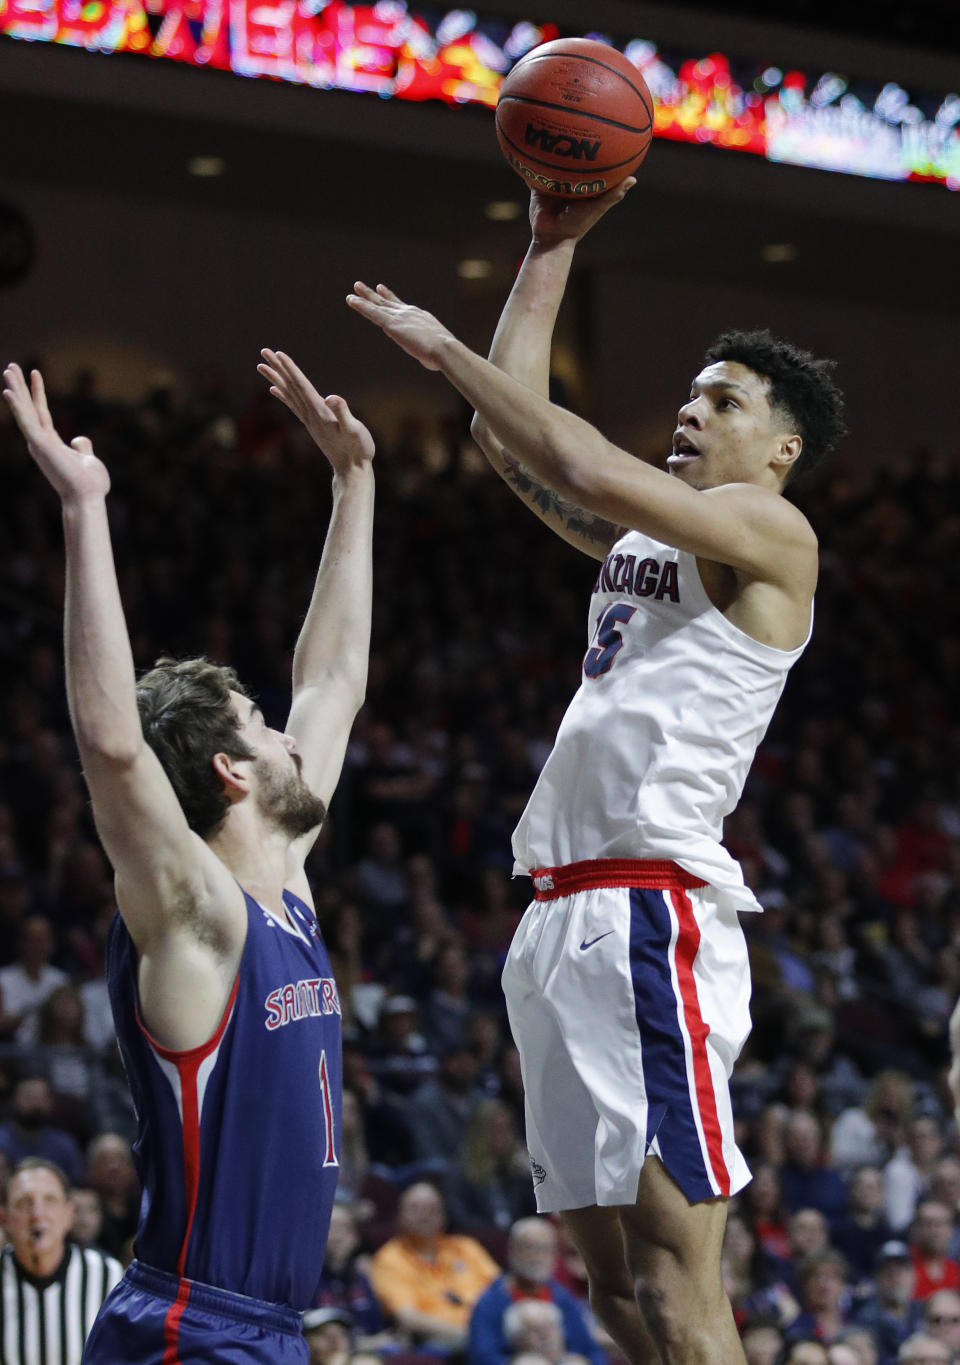 Gonzaga's Brandon Clarke shoots over St. Mary's Jordan Hunter during the first half of an NCAA college basketball game for the West Coast Conference men's tournament title, Tuesday, March 12, 2019, in Las Vegas. (AP Photo/John Locher)